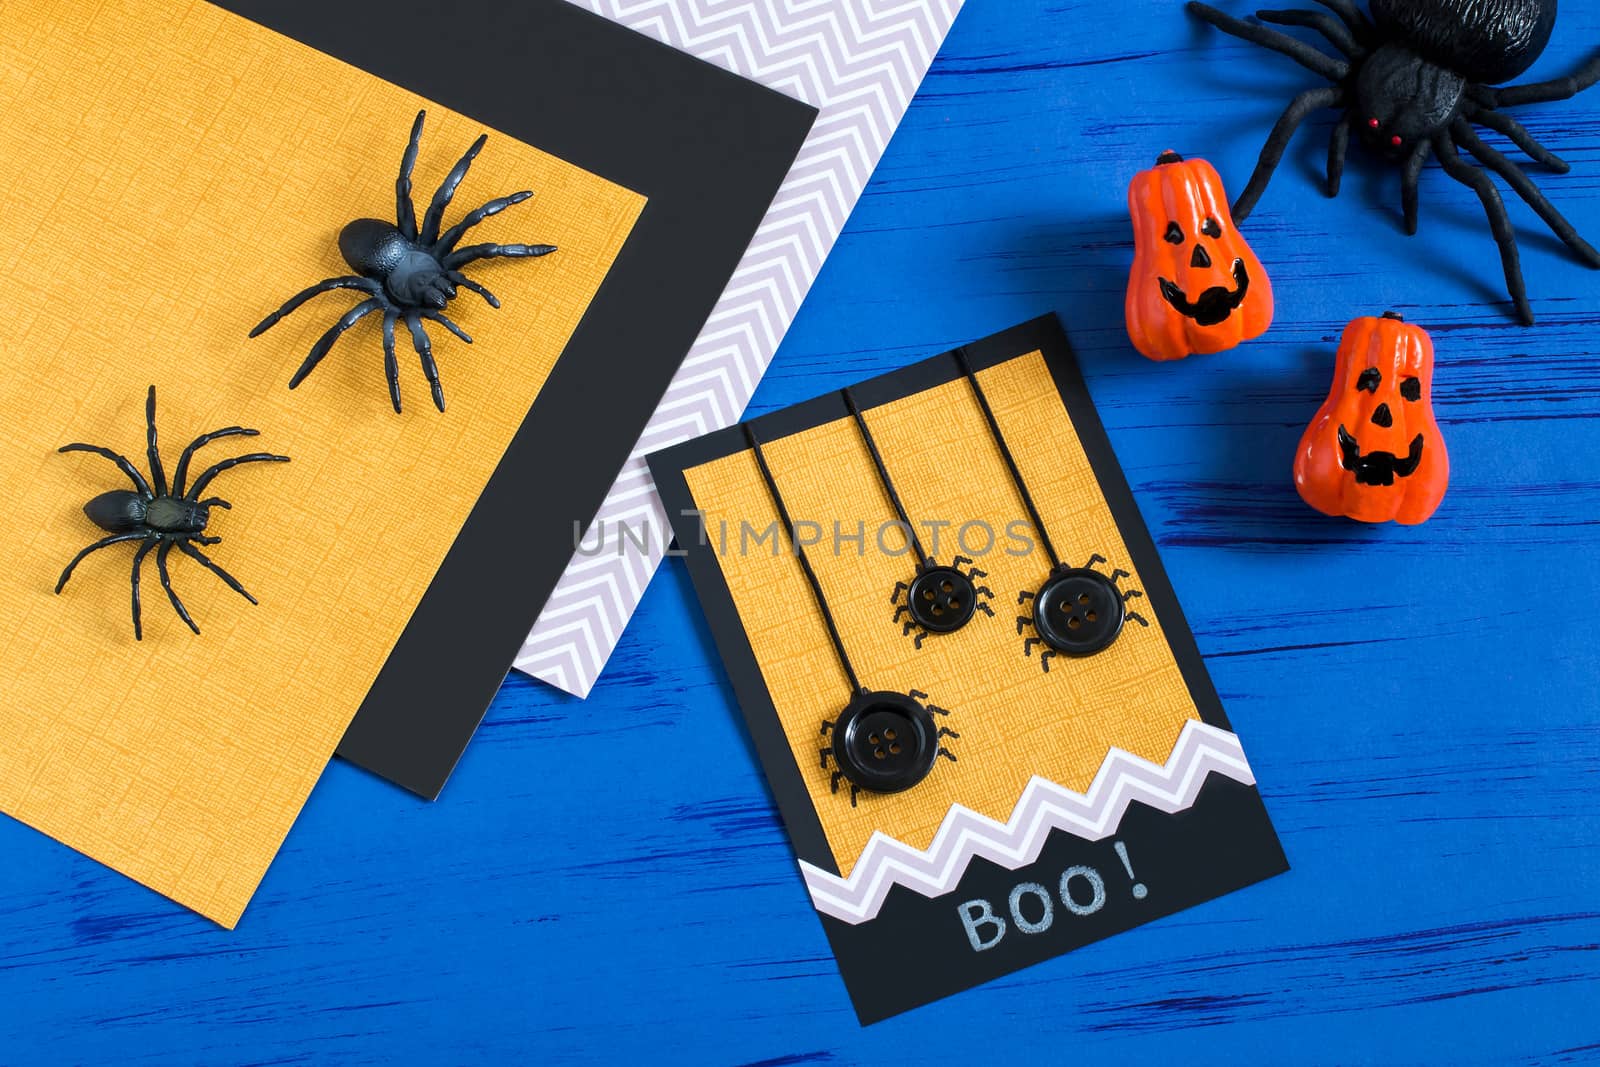 Child makes card with spiders to Halloween. Children's art project. DIY concept. Step-by-step photo instruction. Step 8. Final result